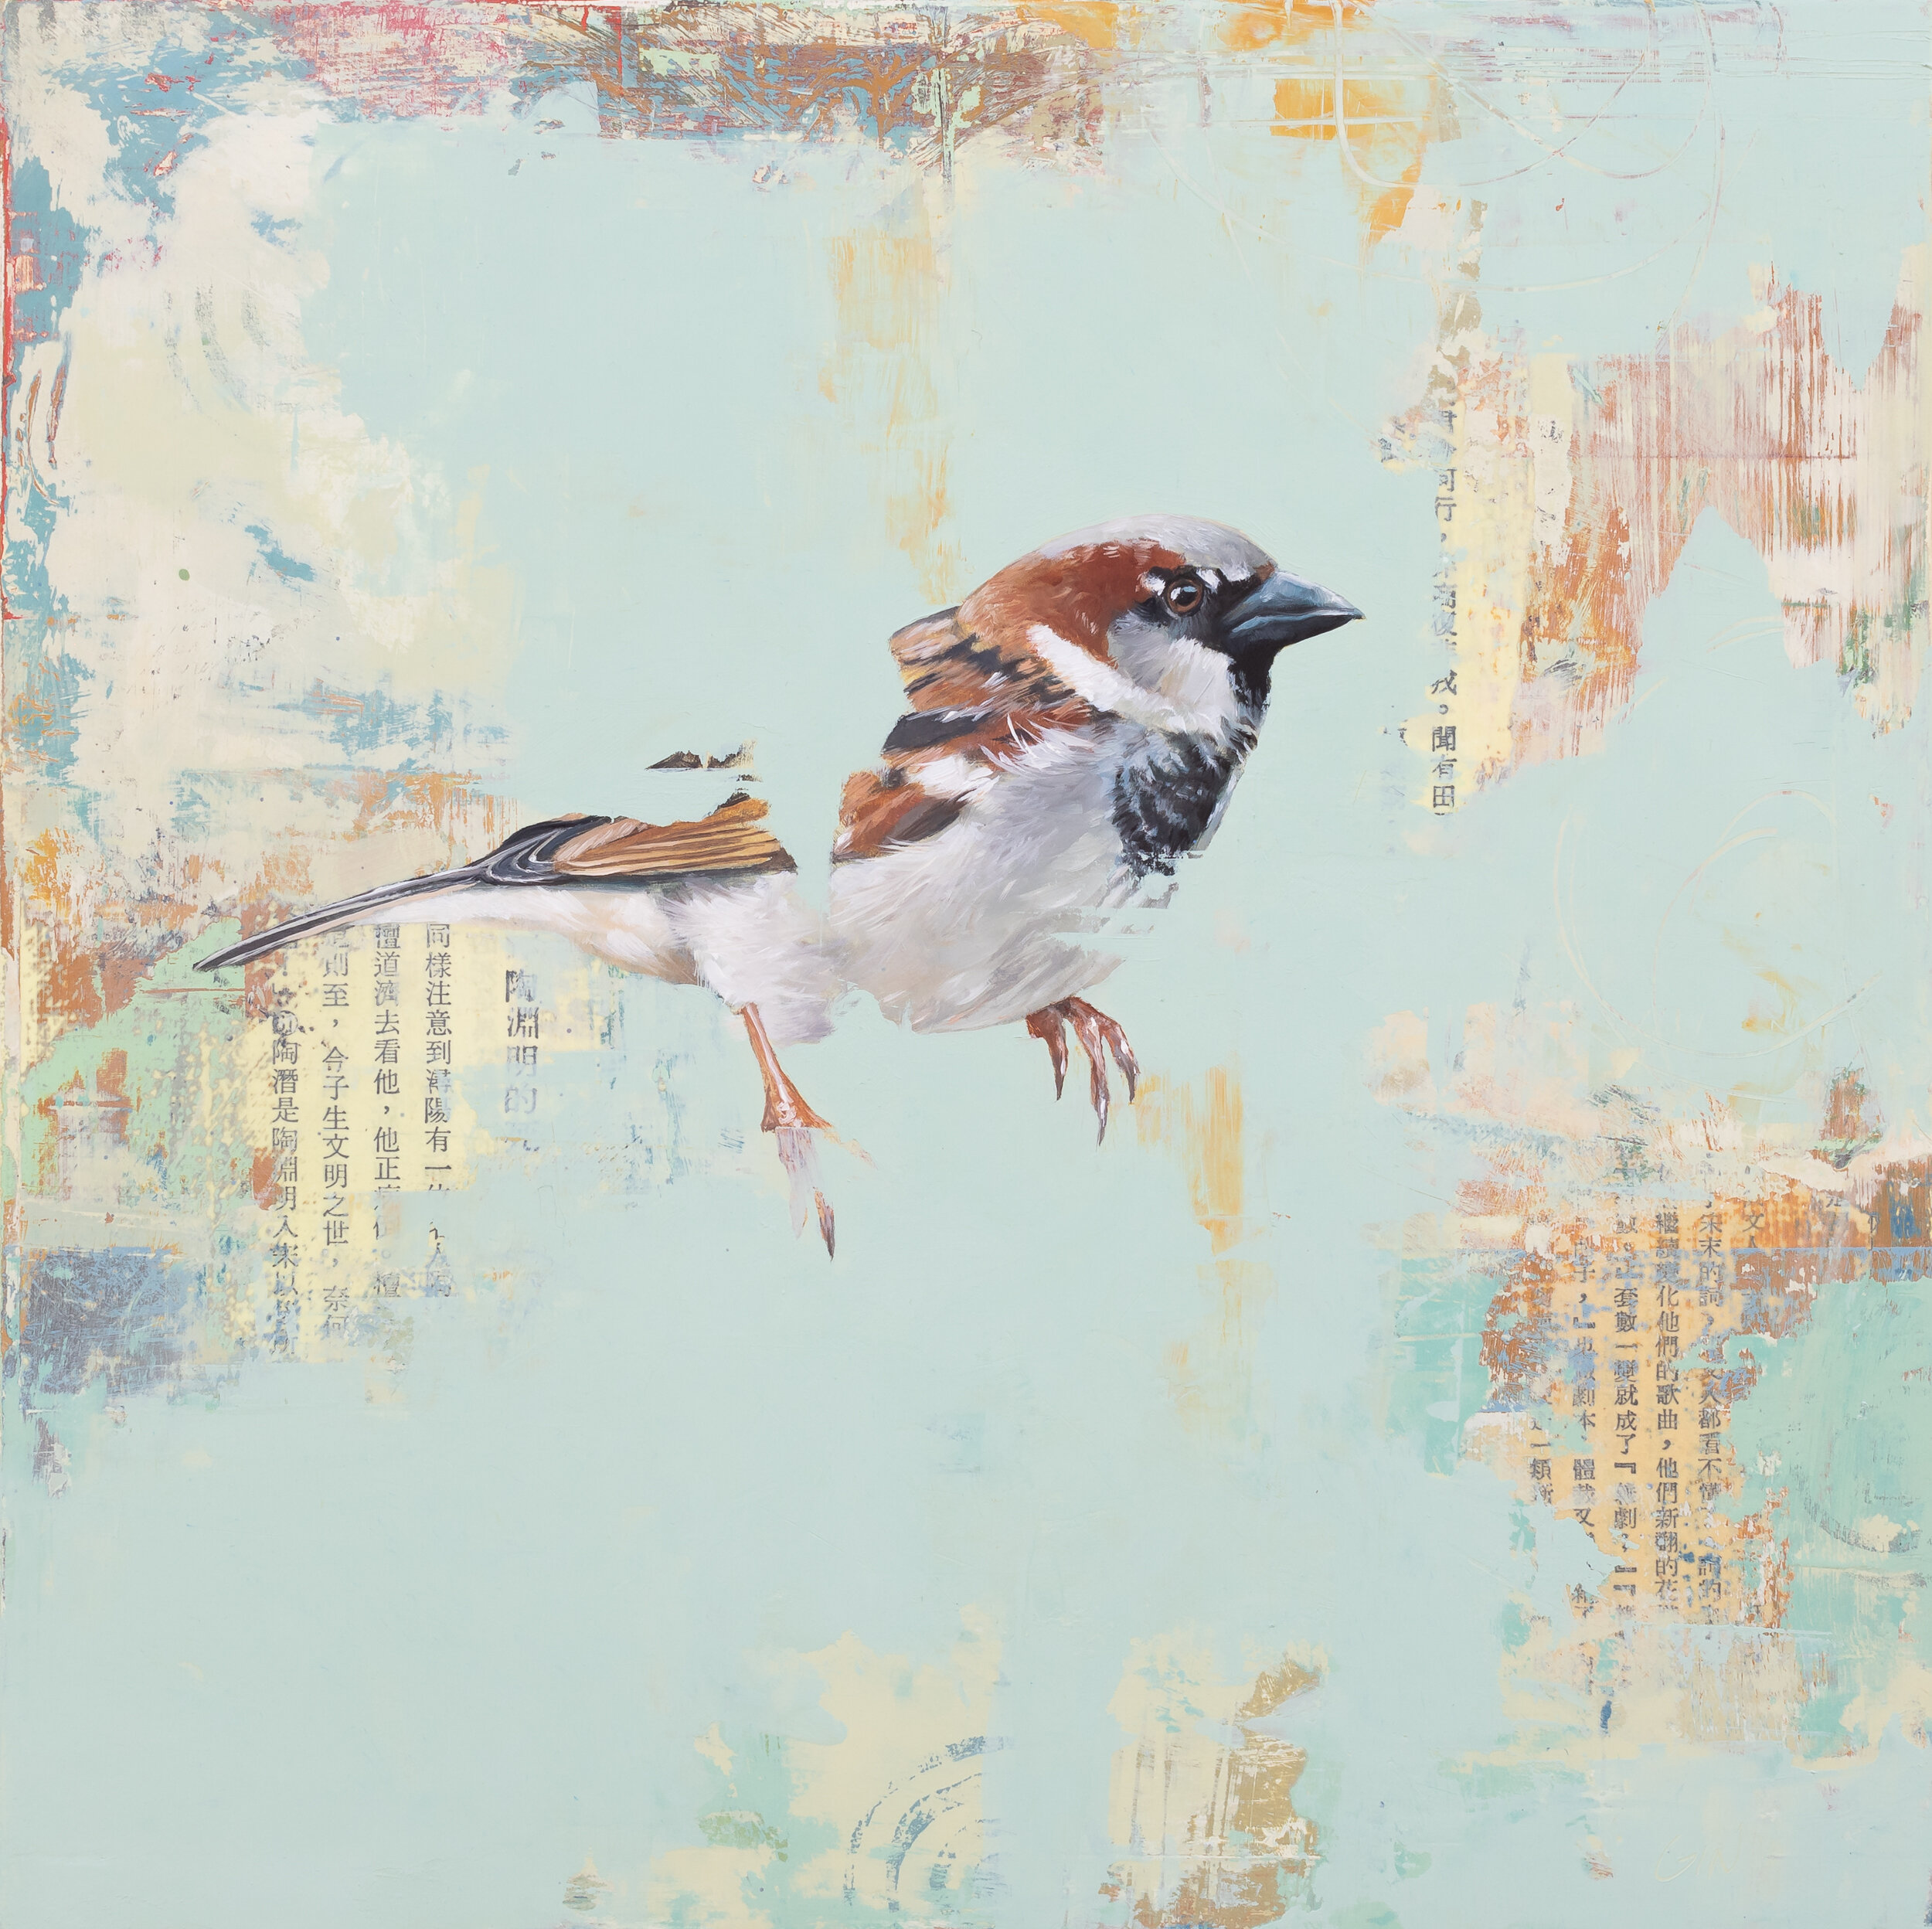     Sparrow Interlude  2021 oil and collage on panel 10 x 10 inches  Private Collection 